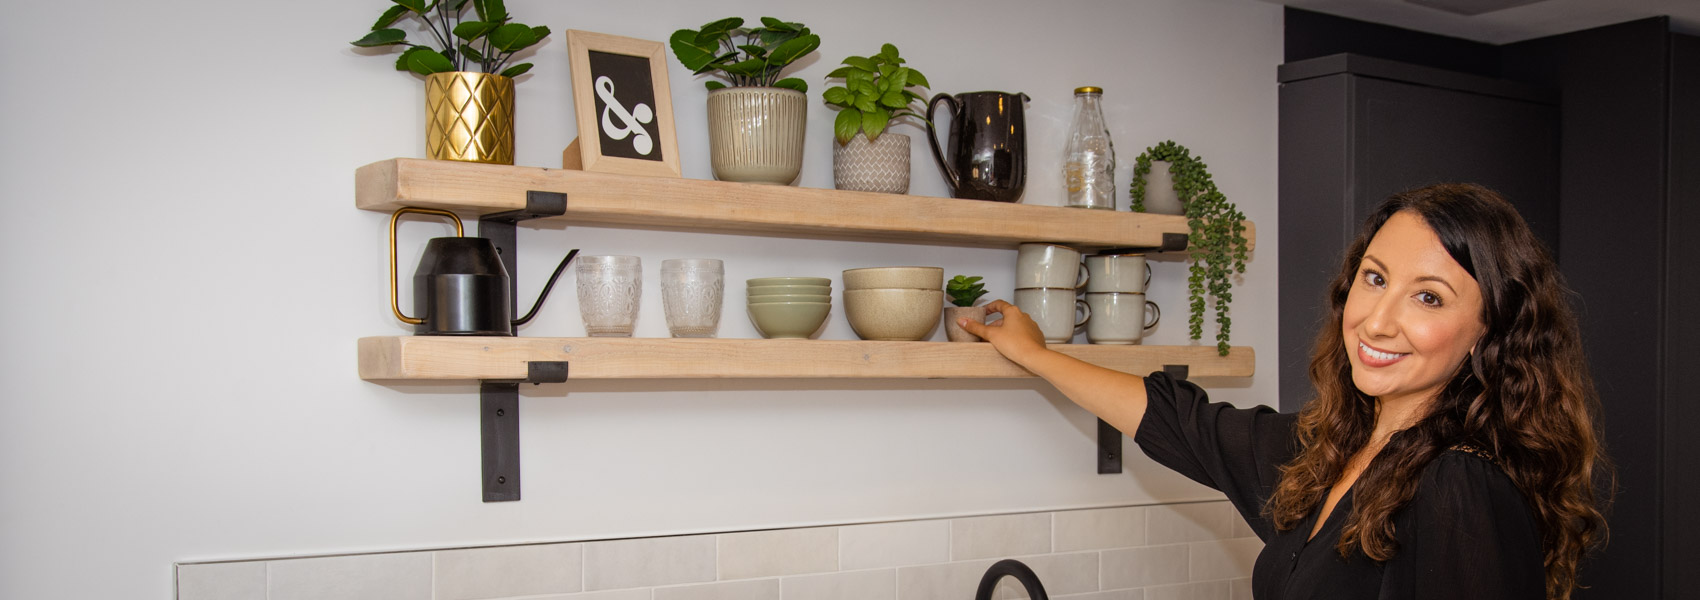 How to dress your kitchen shelves